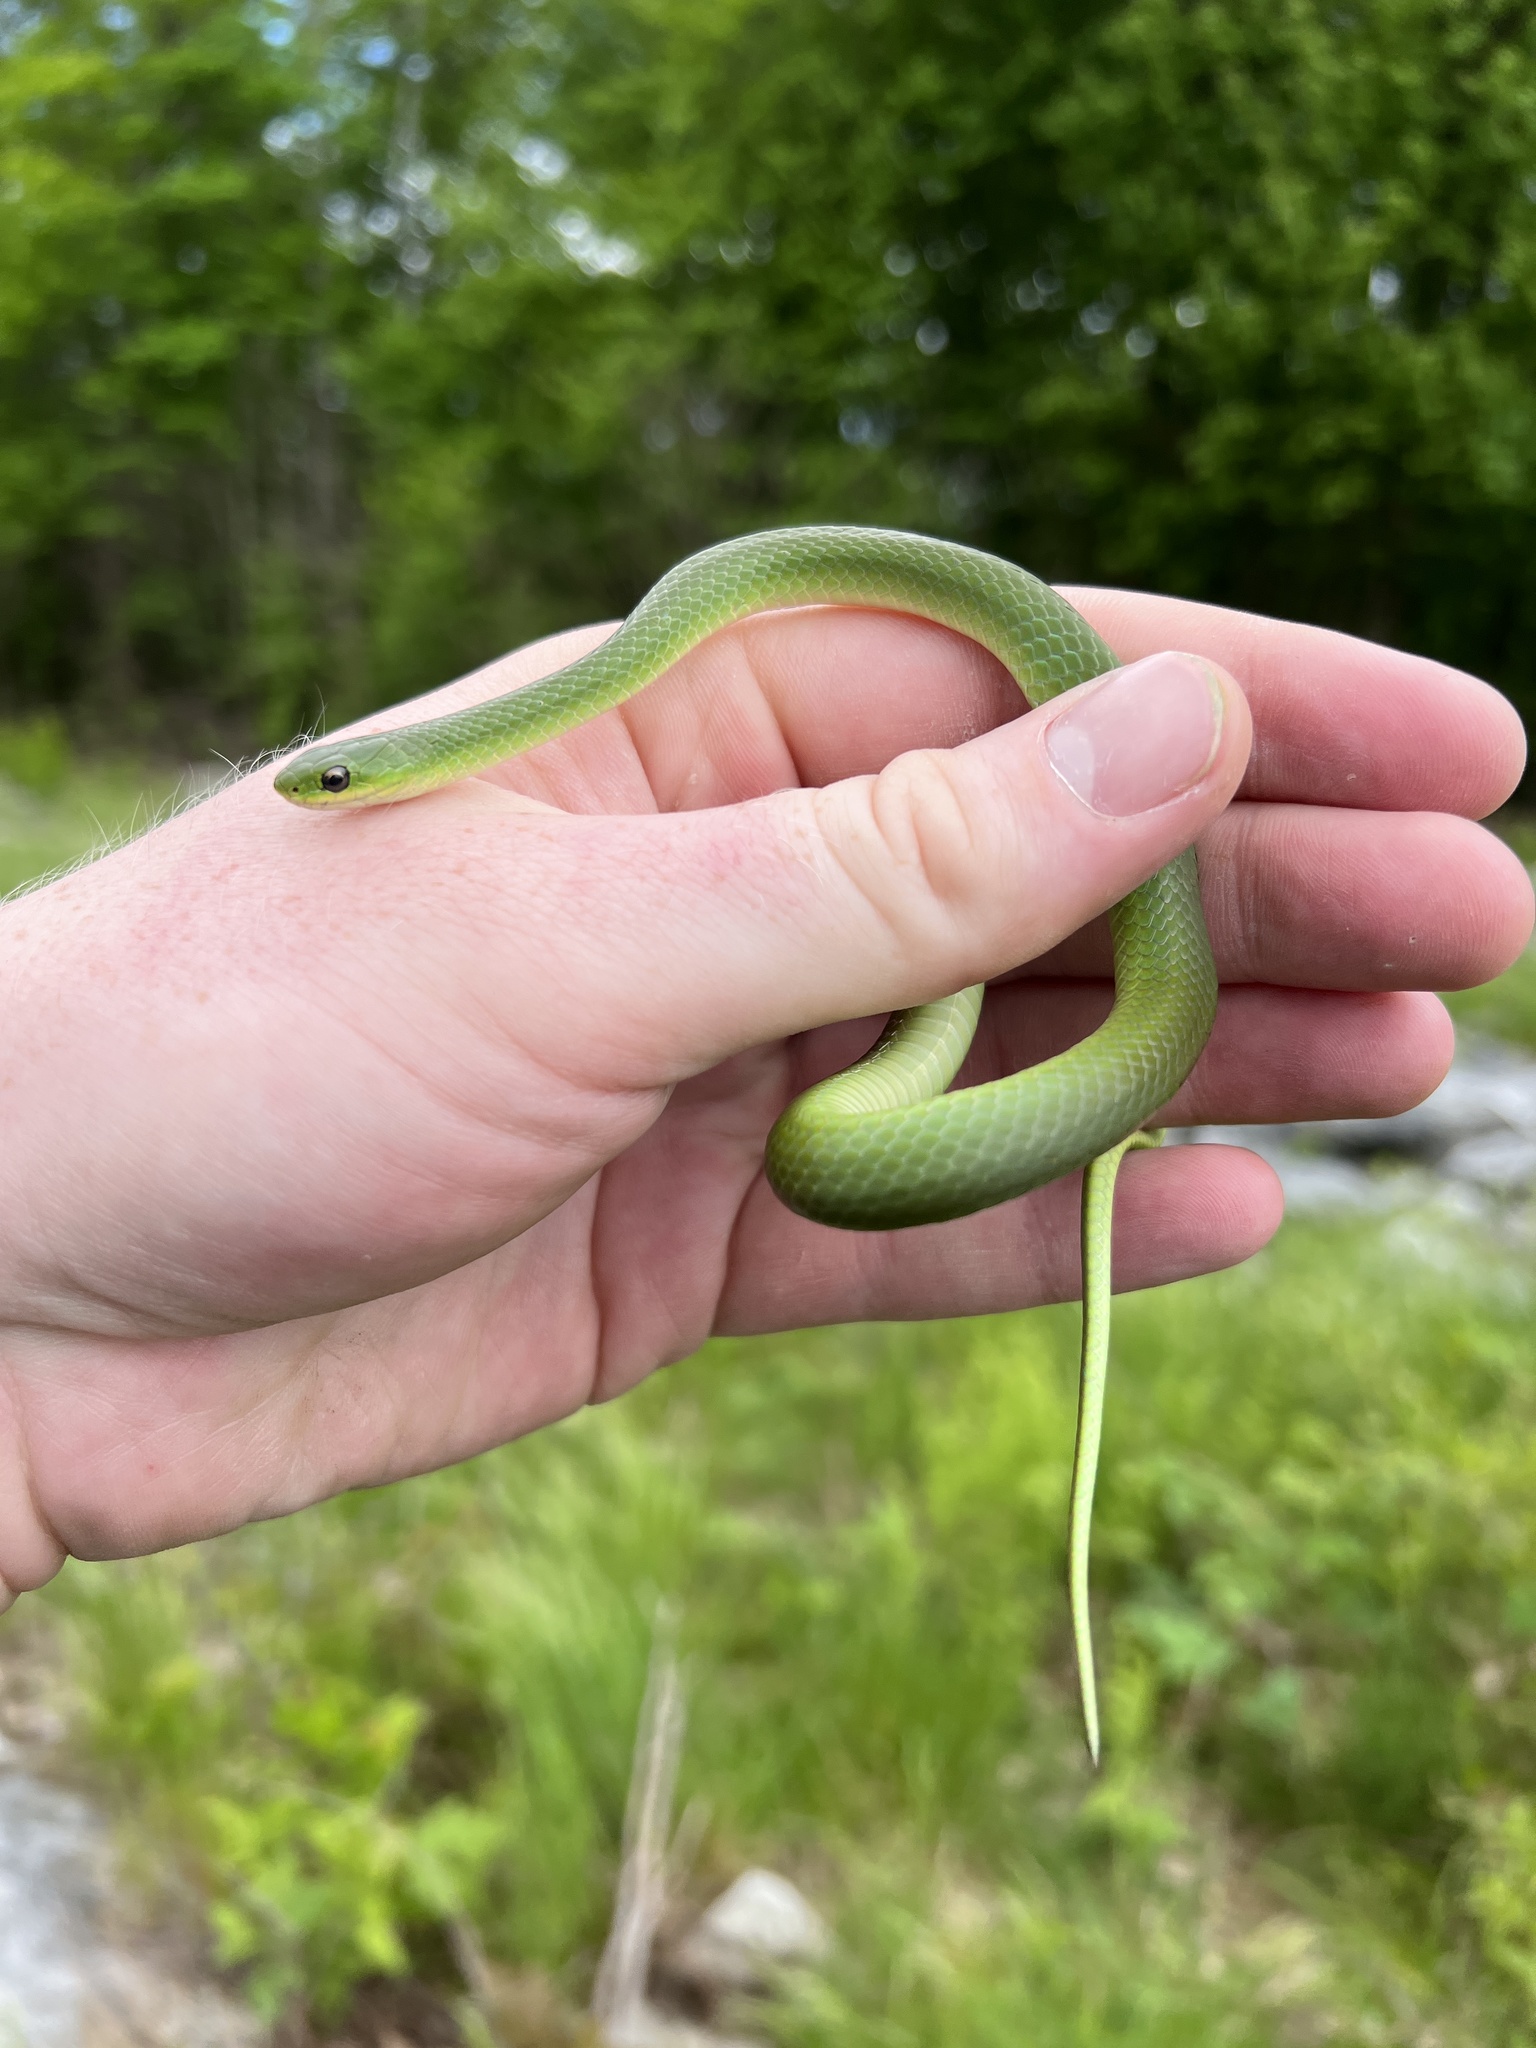 Learn about smooth greensnakes